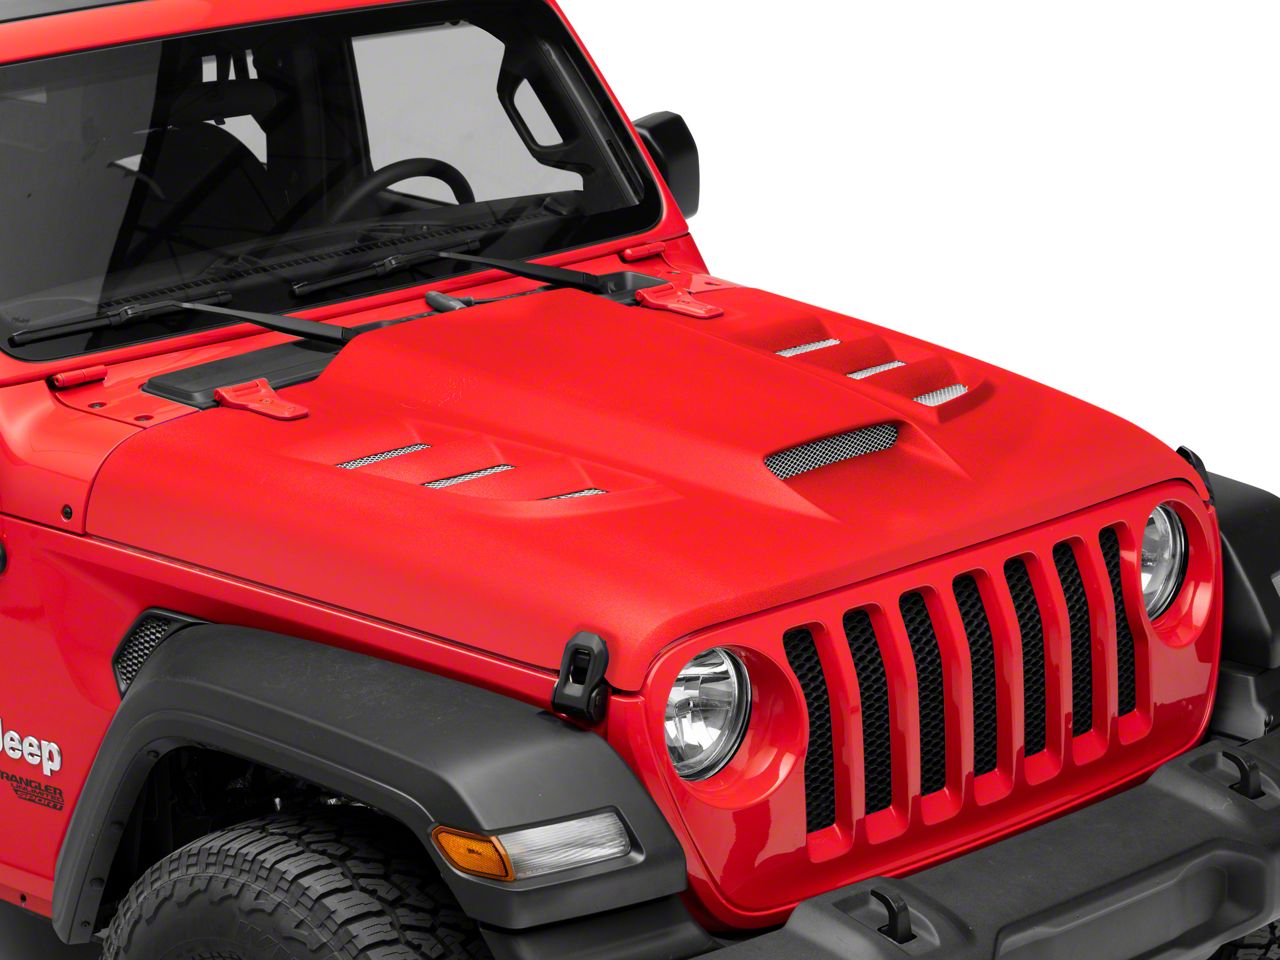 Ram Air Jeep Hoods, Hood Latches  Accessories for Wrangler ExtremeTerrain